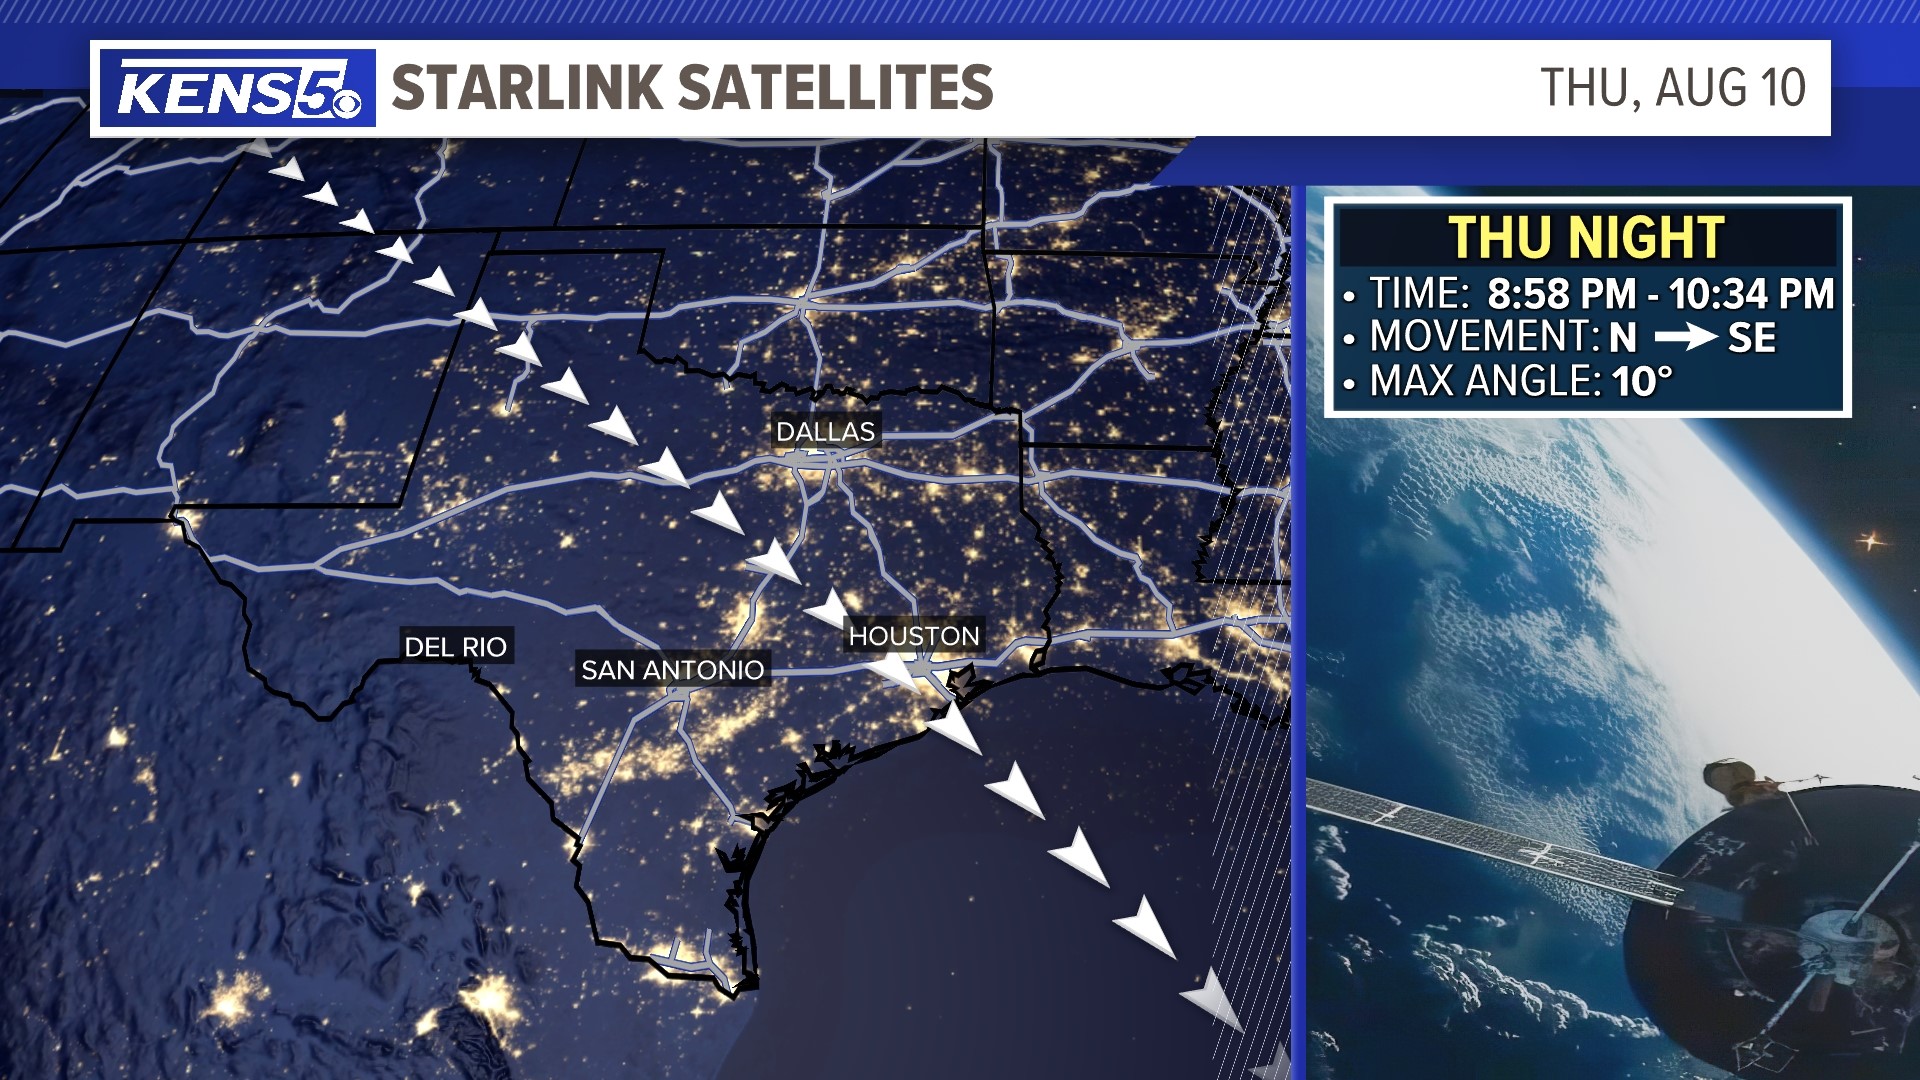 These Starlink satellites provide internet coverage across the globe and provide something interesting for stargazers to monitor.